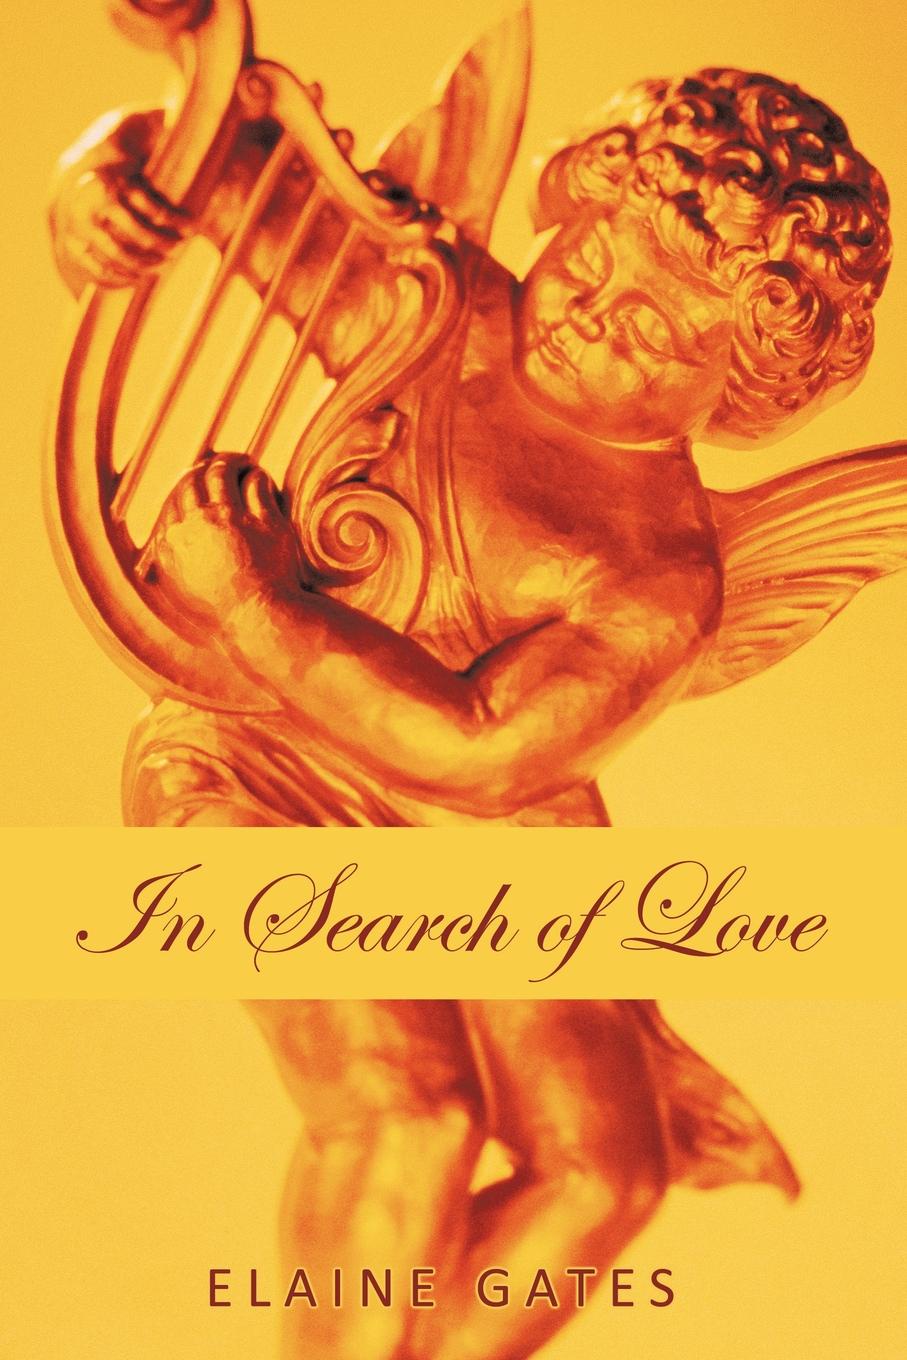 In Search of Love